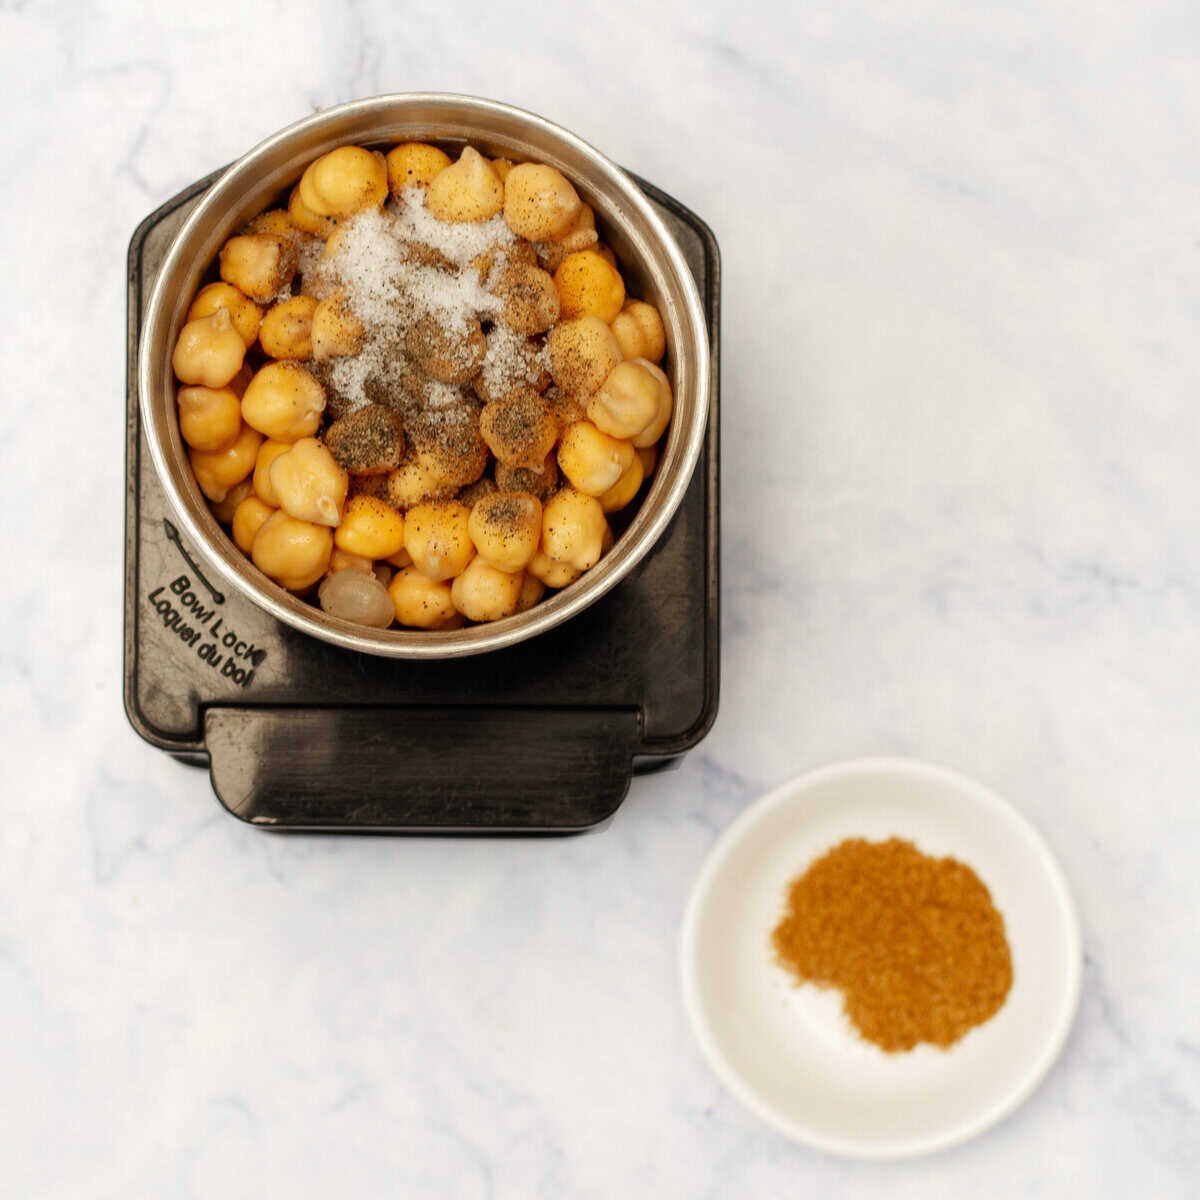 Season and cook the chickpeas. 